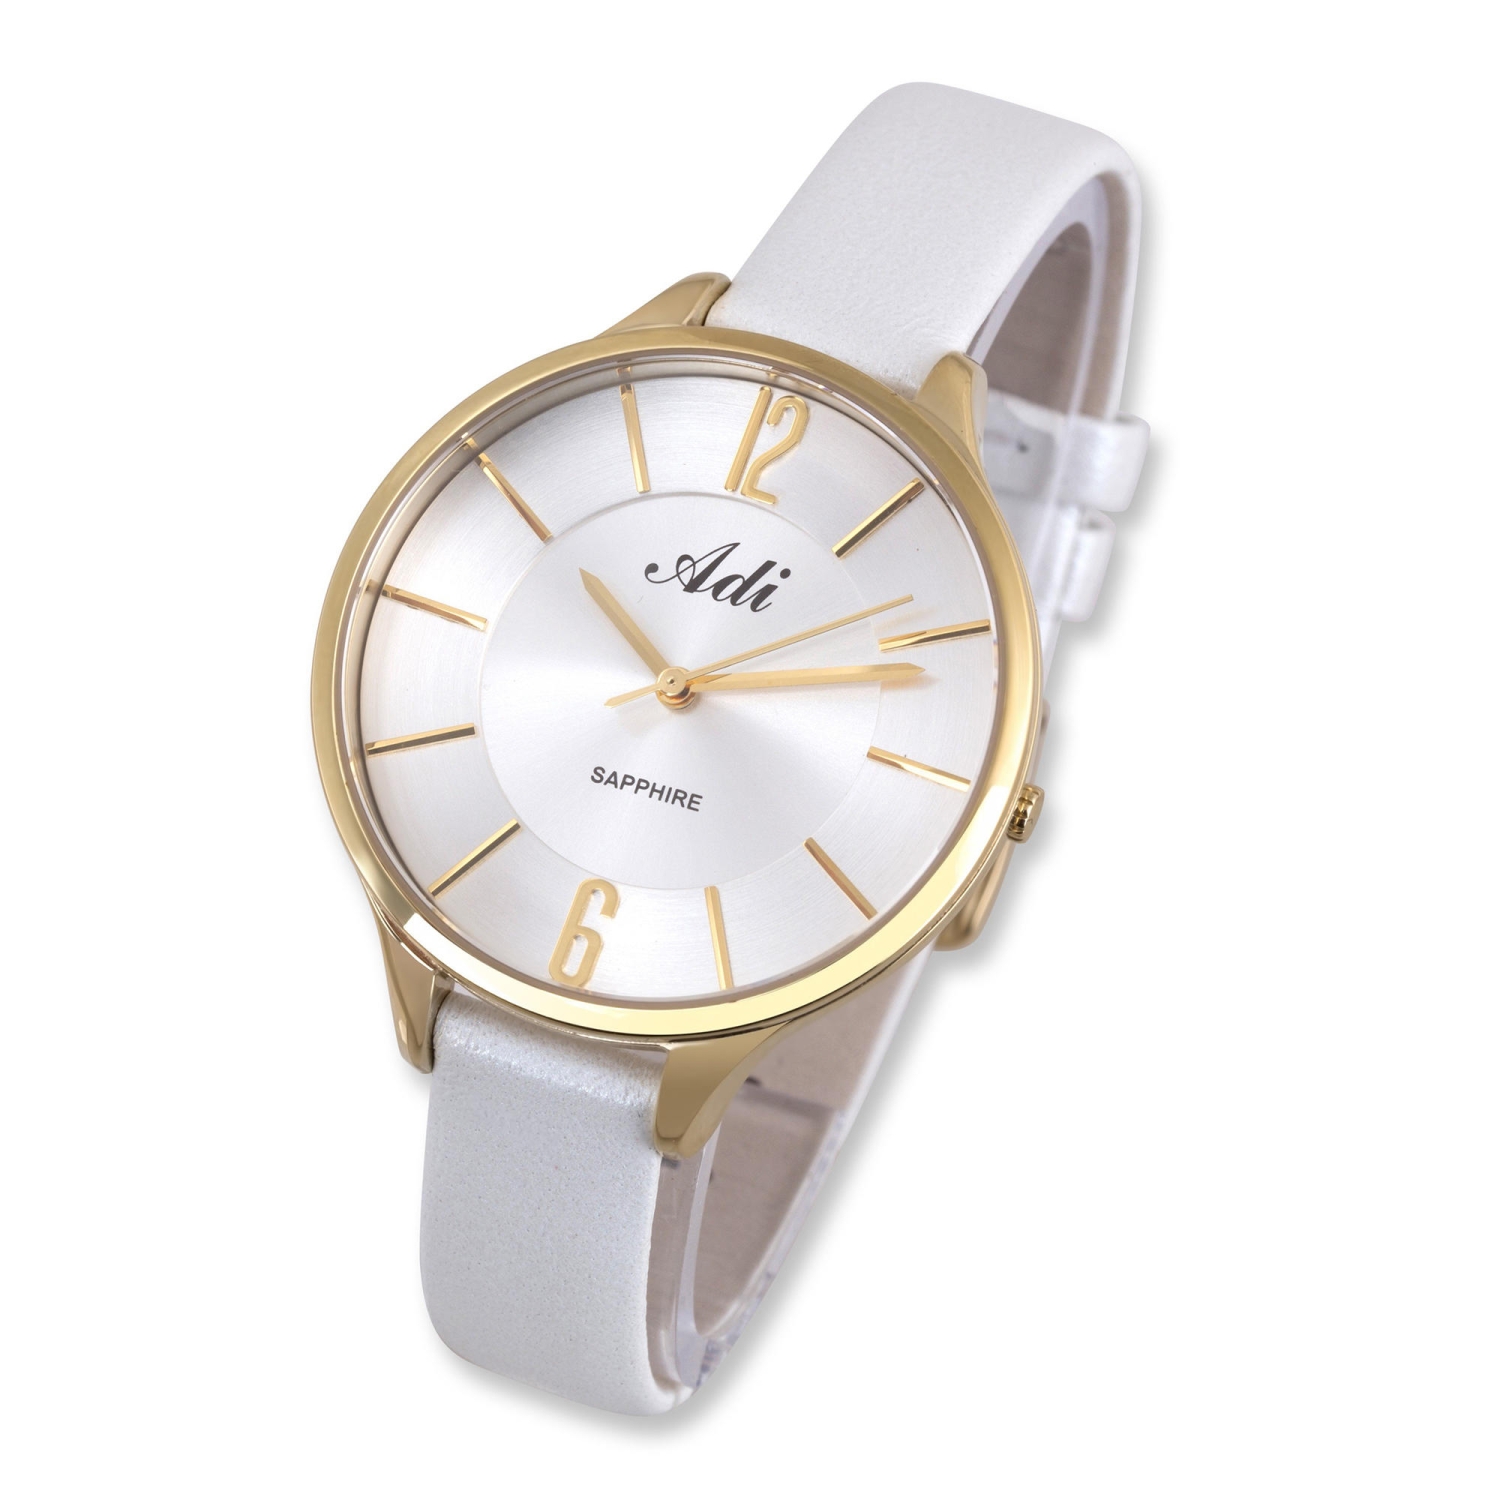 Adi White Watch with Leather Strap and Gold Plated Face - 1